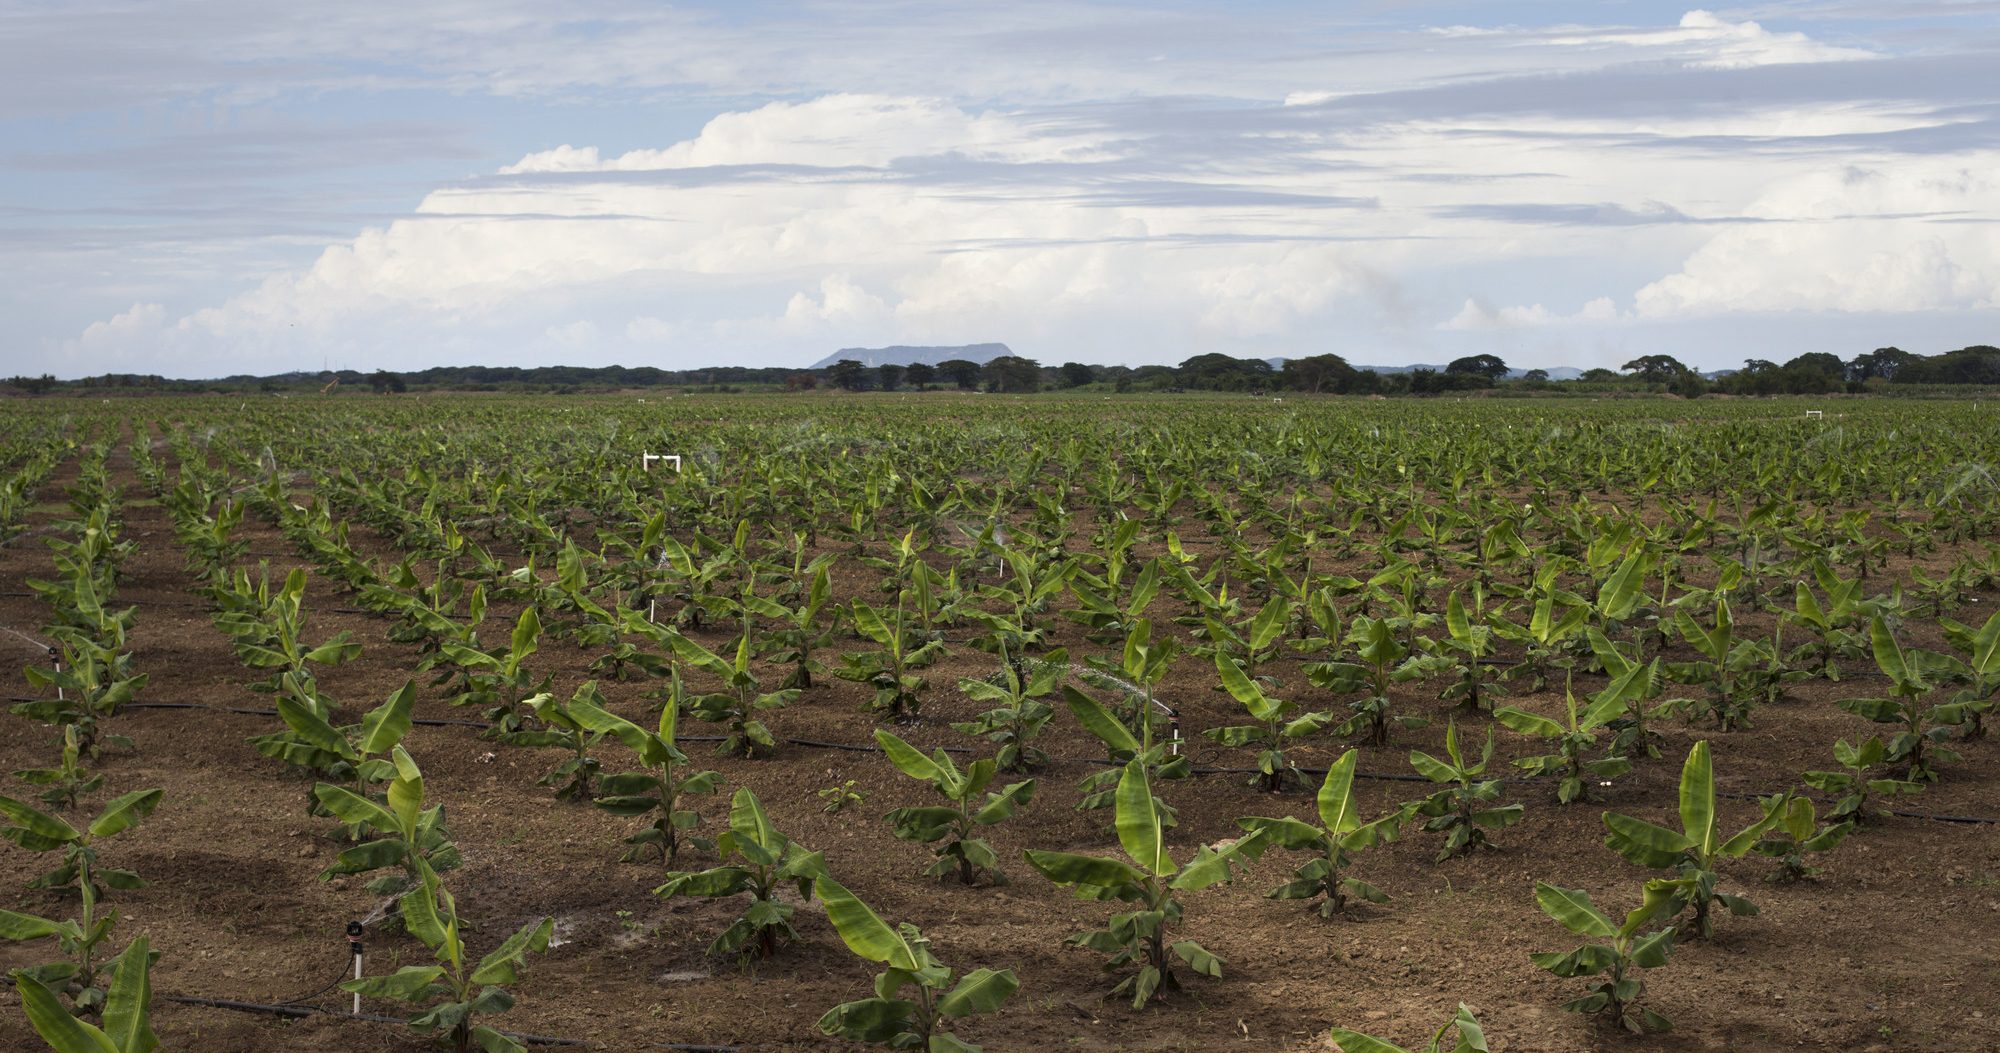 Field of small banana plants in the Dominican Republic.